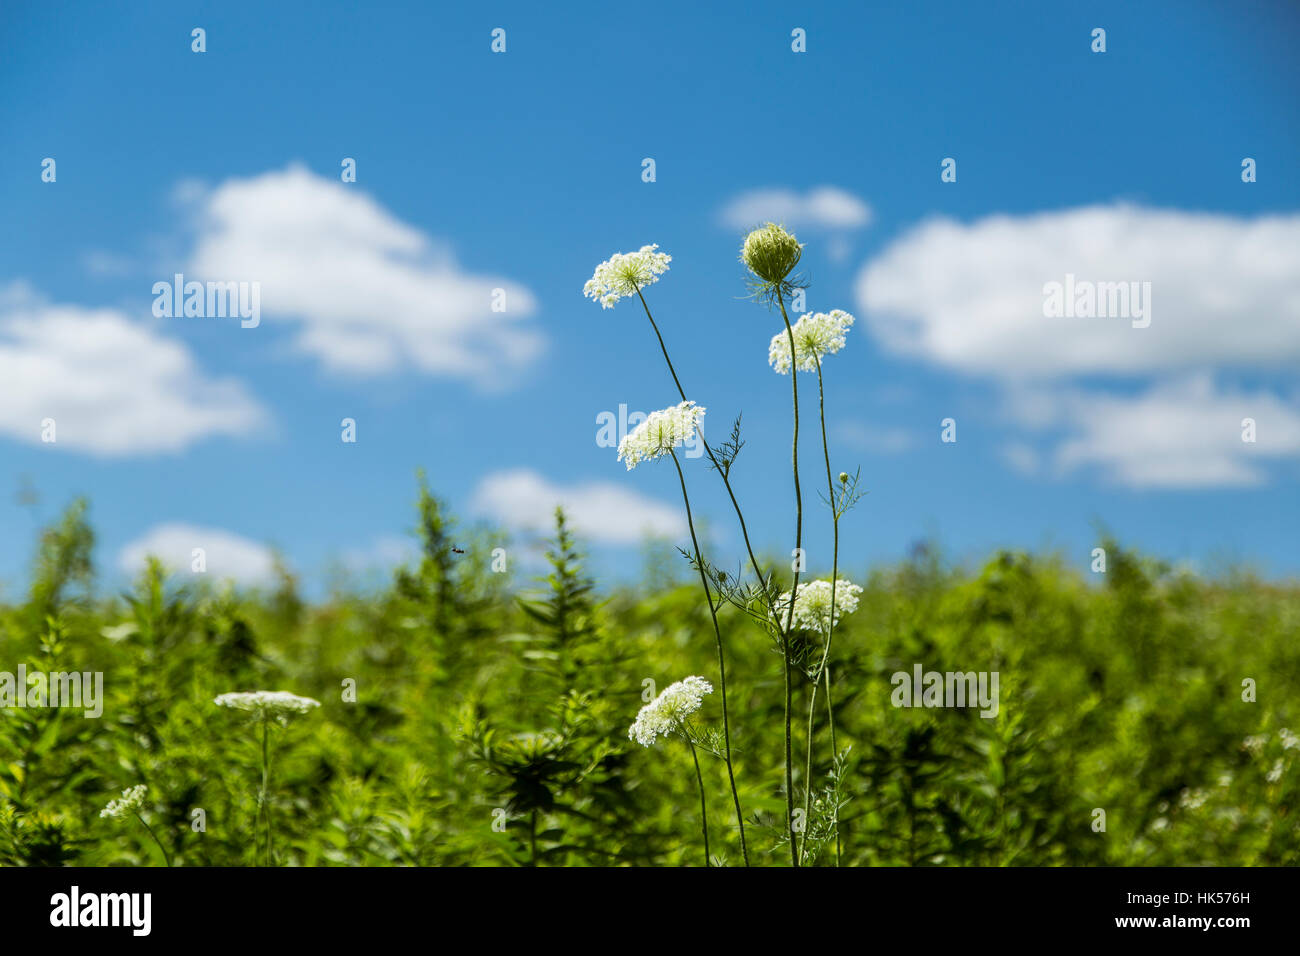 a landscape with a green meadow, blue sky, white flowers, and puffy white clouds in the summer Stock Photo